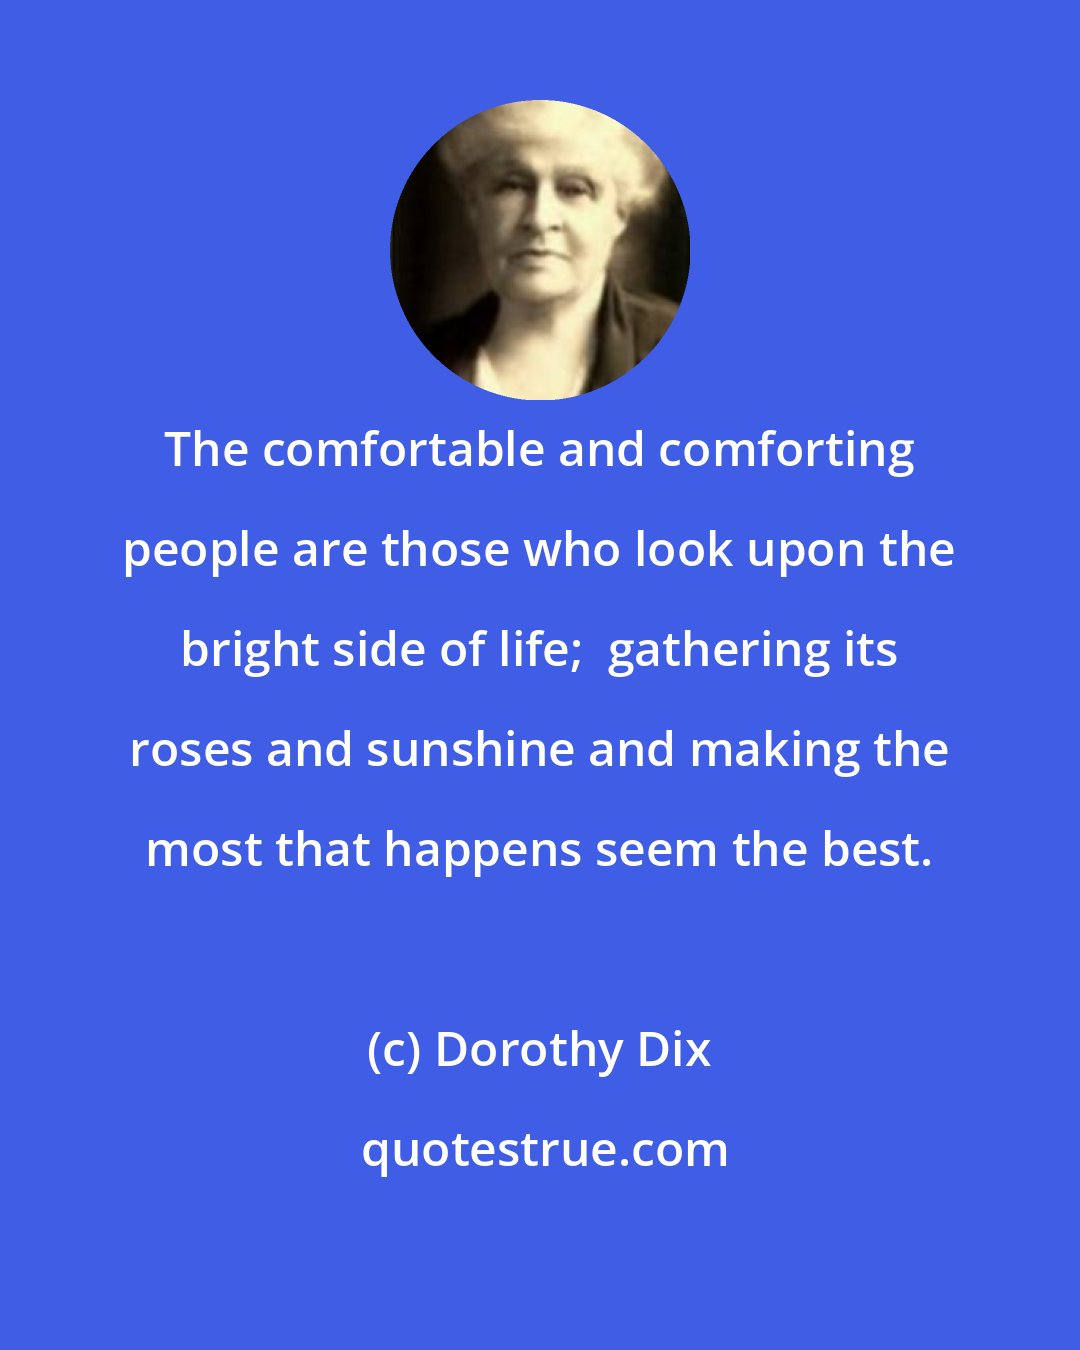 Dorothy Dix: The comfortable and comforting people are those who look upon the bright side of life;  gathering its roses and sunshine and making the most that happens seem the best.